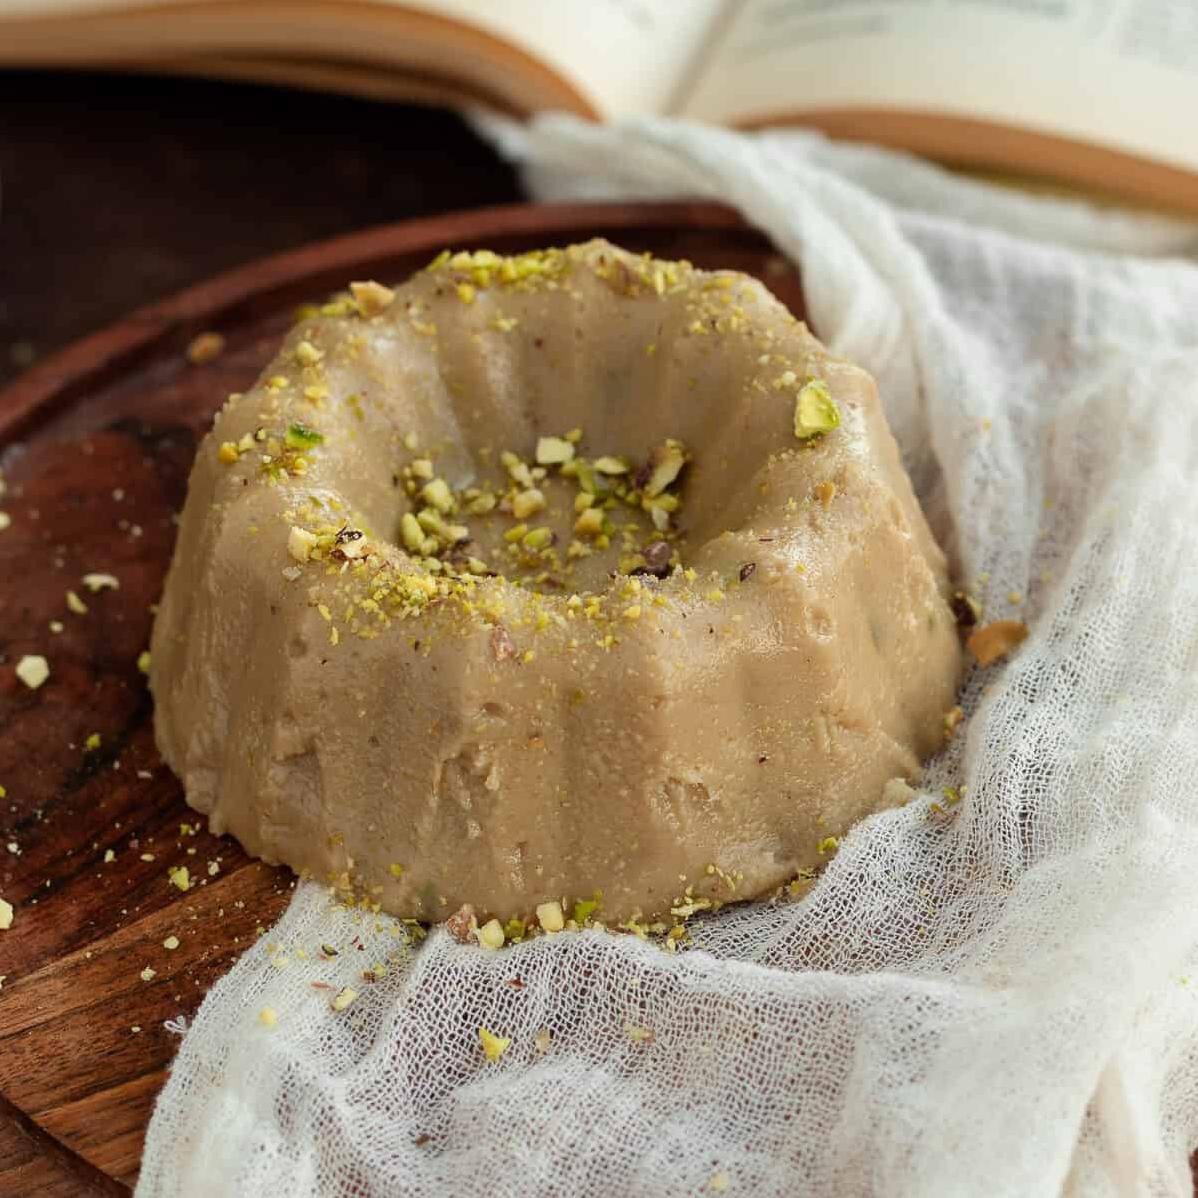  Watch out, this Pistachio & Raisin Halva is about to steal the show!